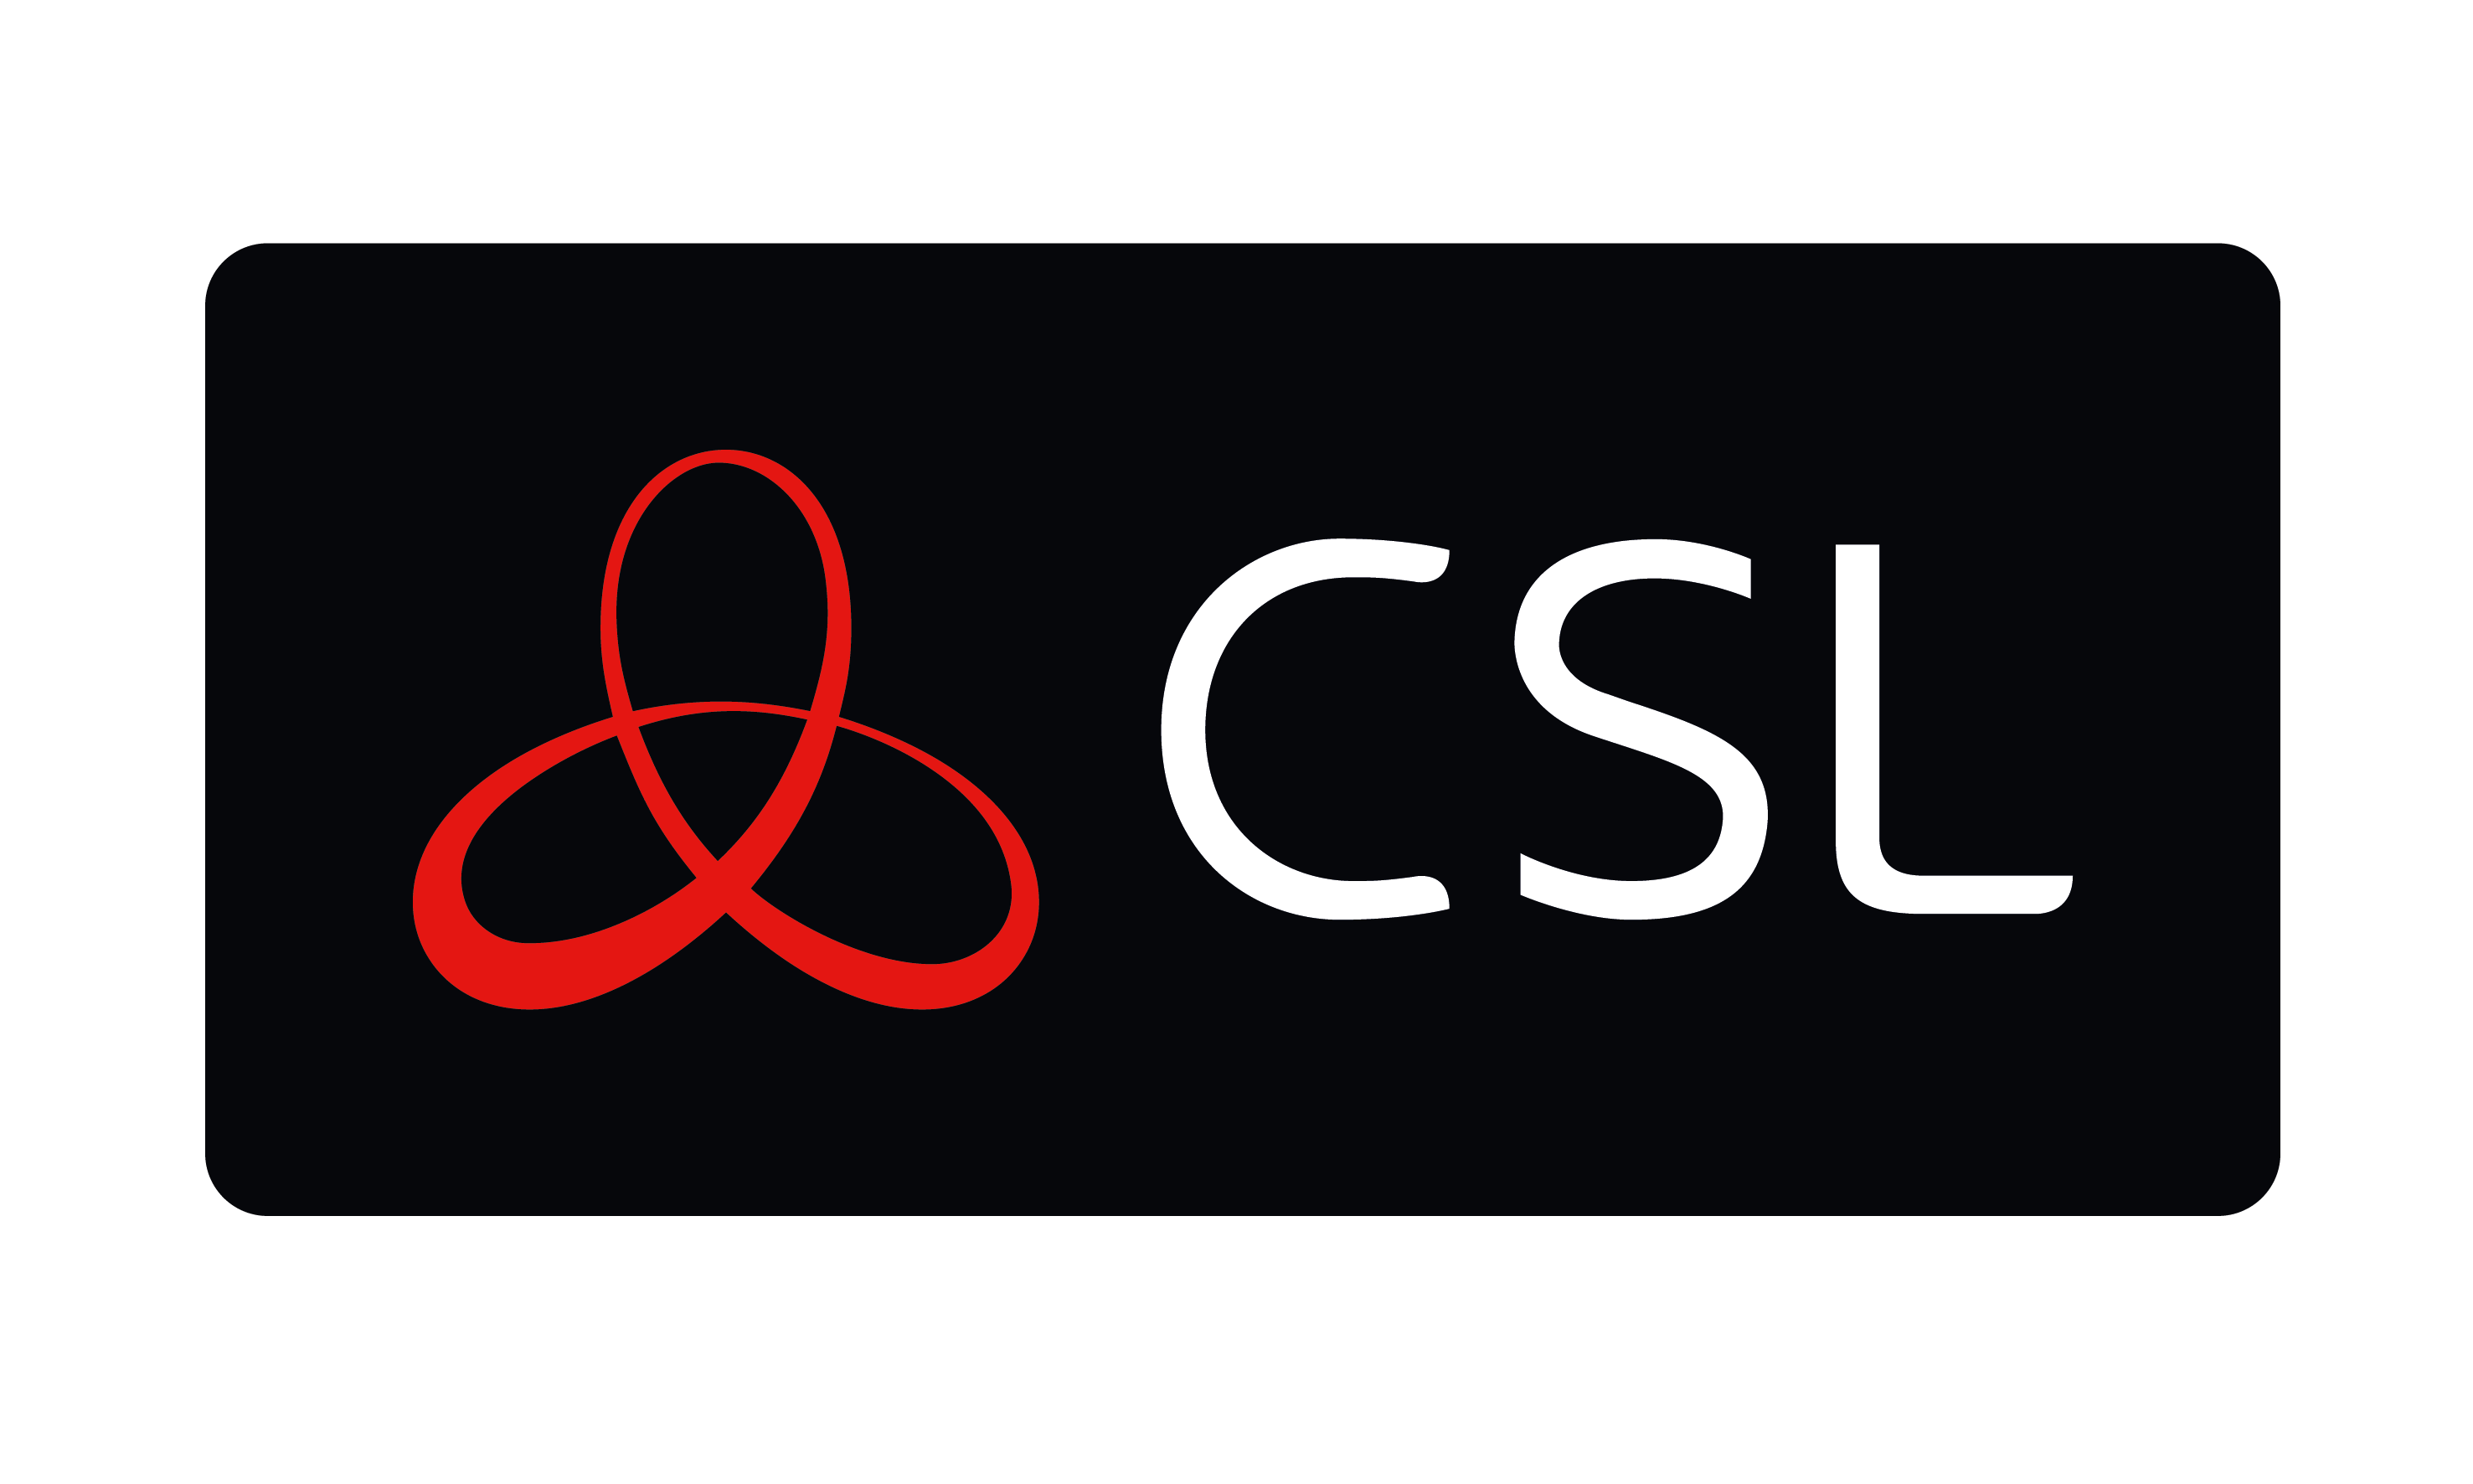 CSL Group Limited